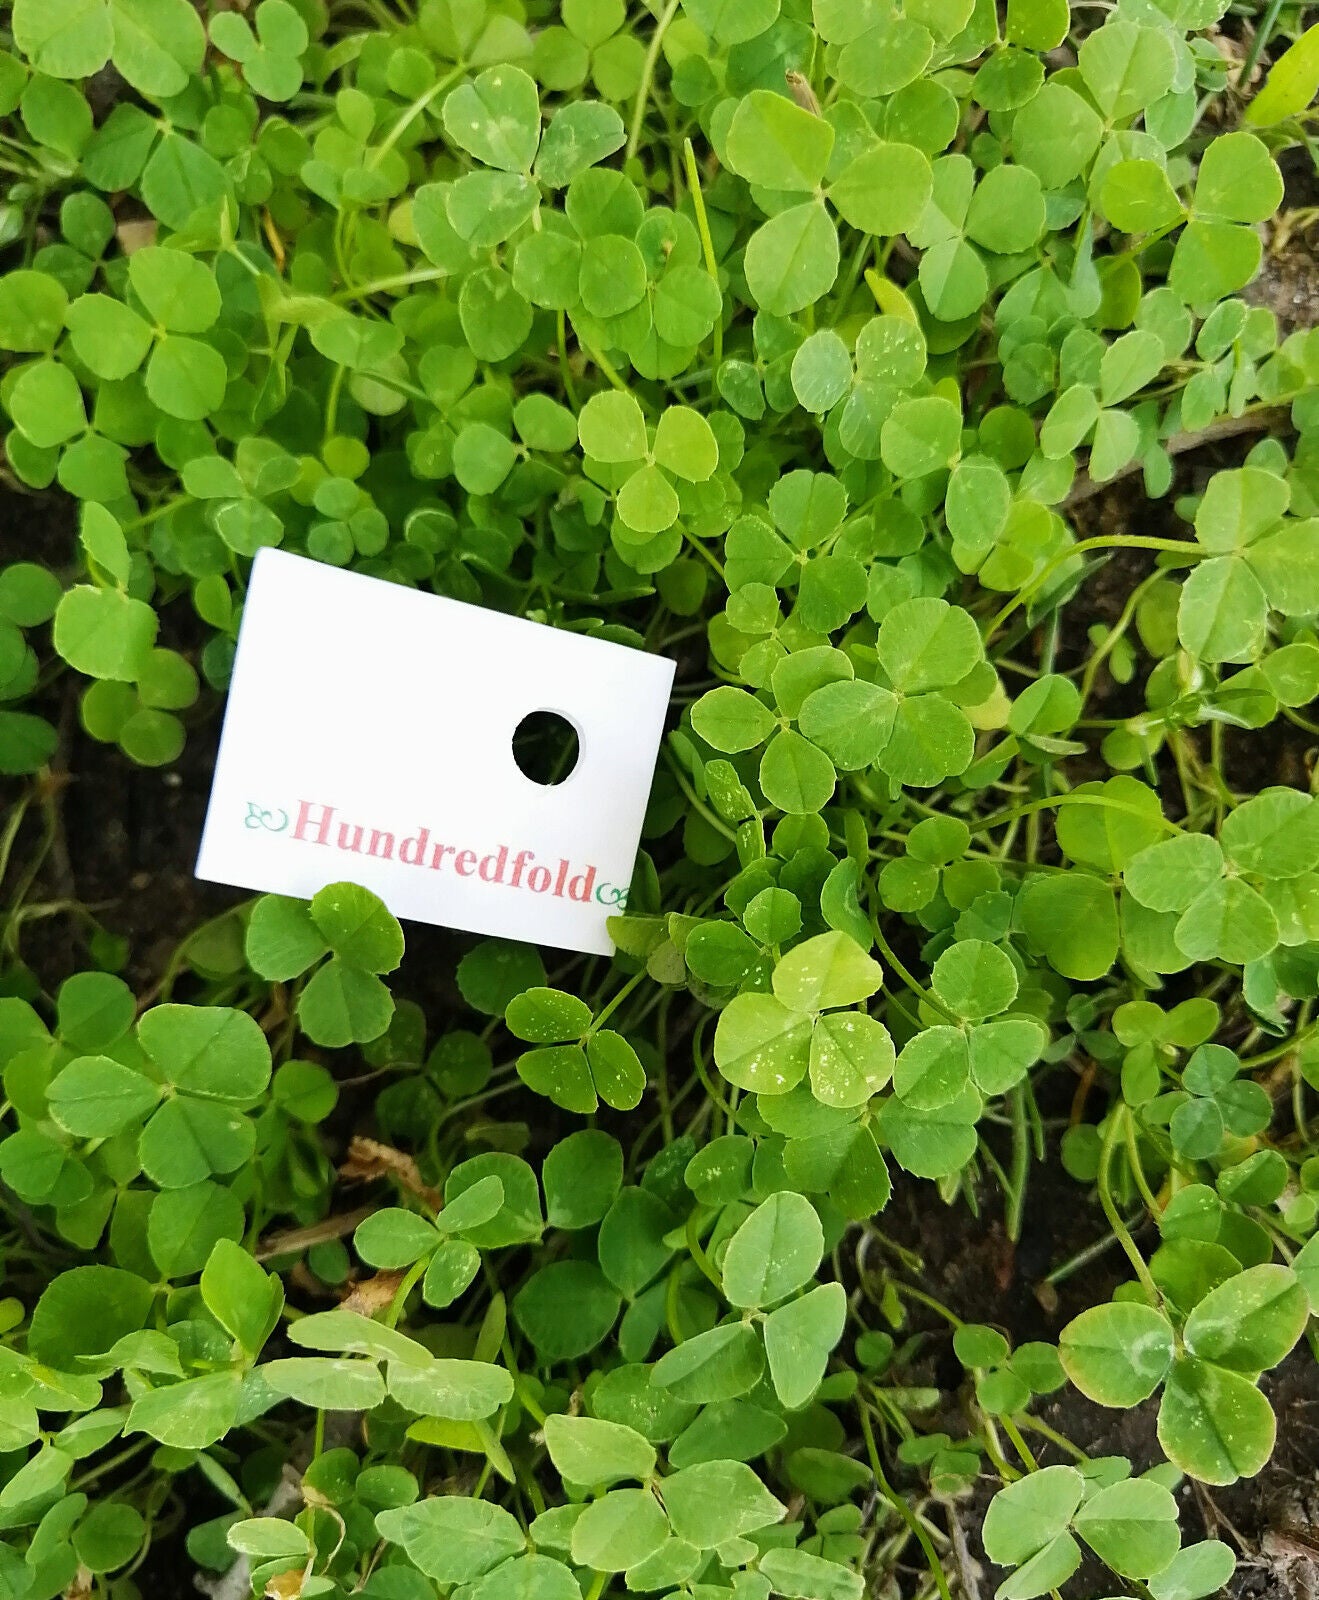 Hundredfold Micro White Clover 6 Grams (0.2oz) Seeds - Perennial Legume Excellent for Enriching Lawn, Ground Cover or Lawn Alternative